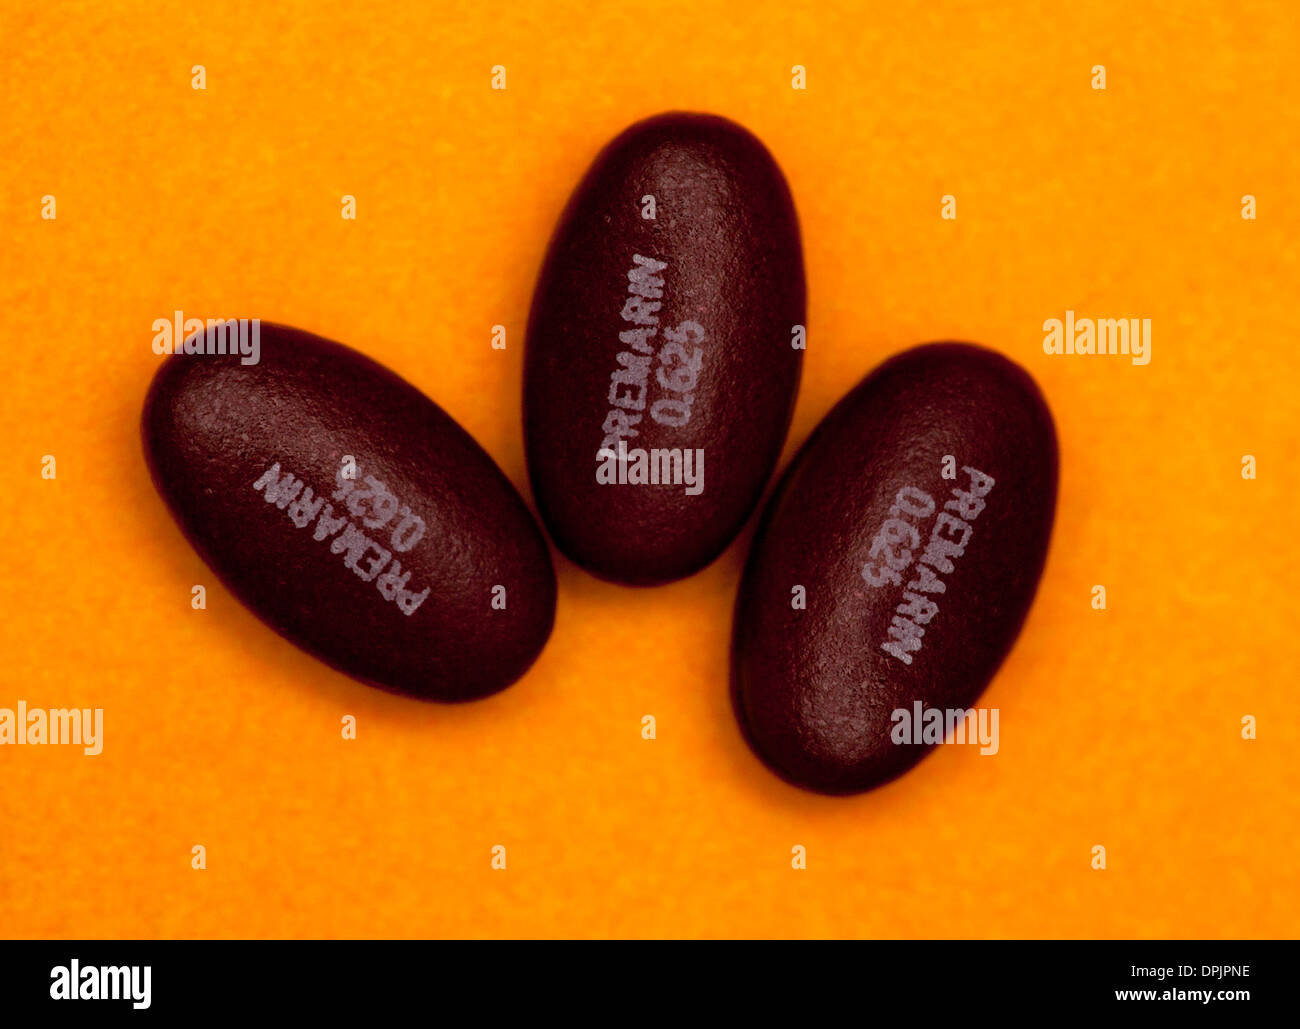 Four Premarin pills, used for estrogen hormone replacement therapy. Stock Photo